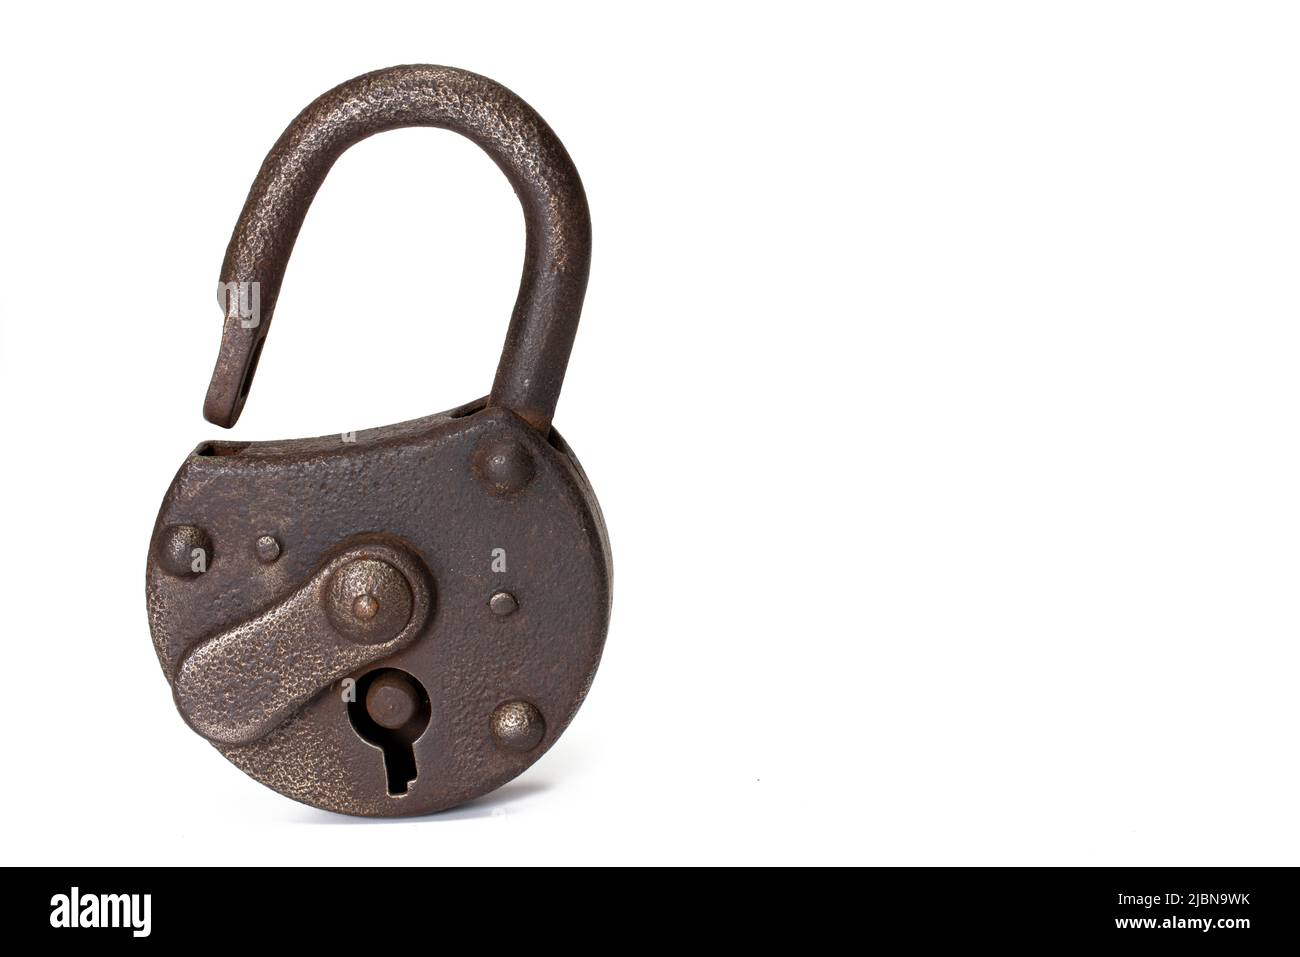 Old rusty shackle-lock standing on white background with open metal shackle and lock guard on white background Stock Photo